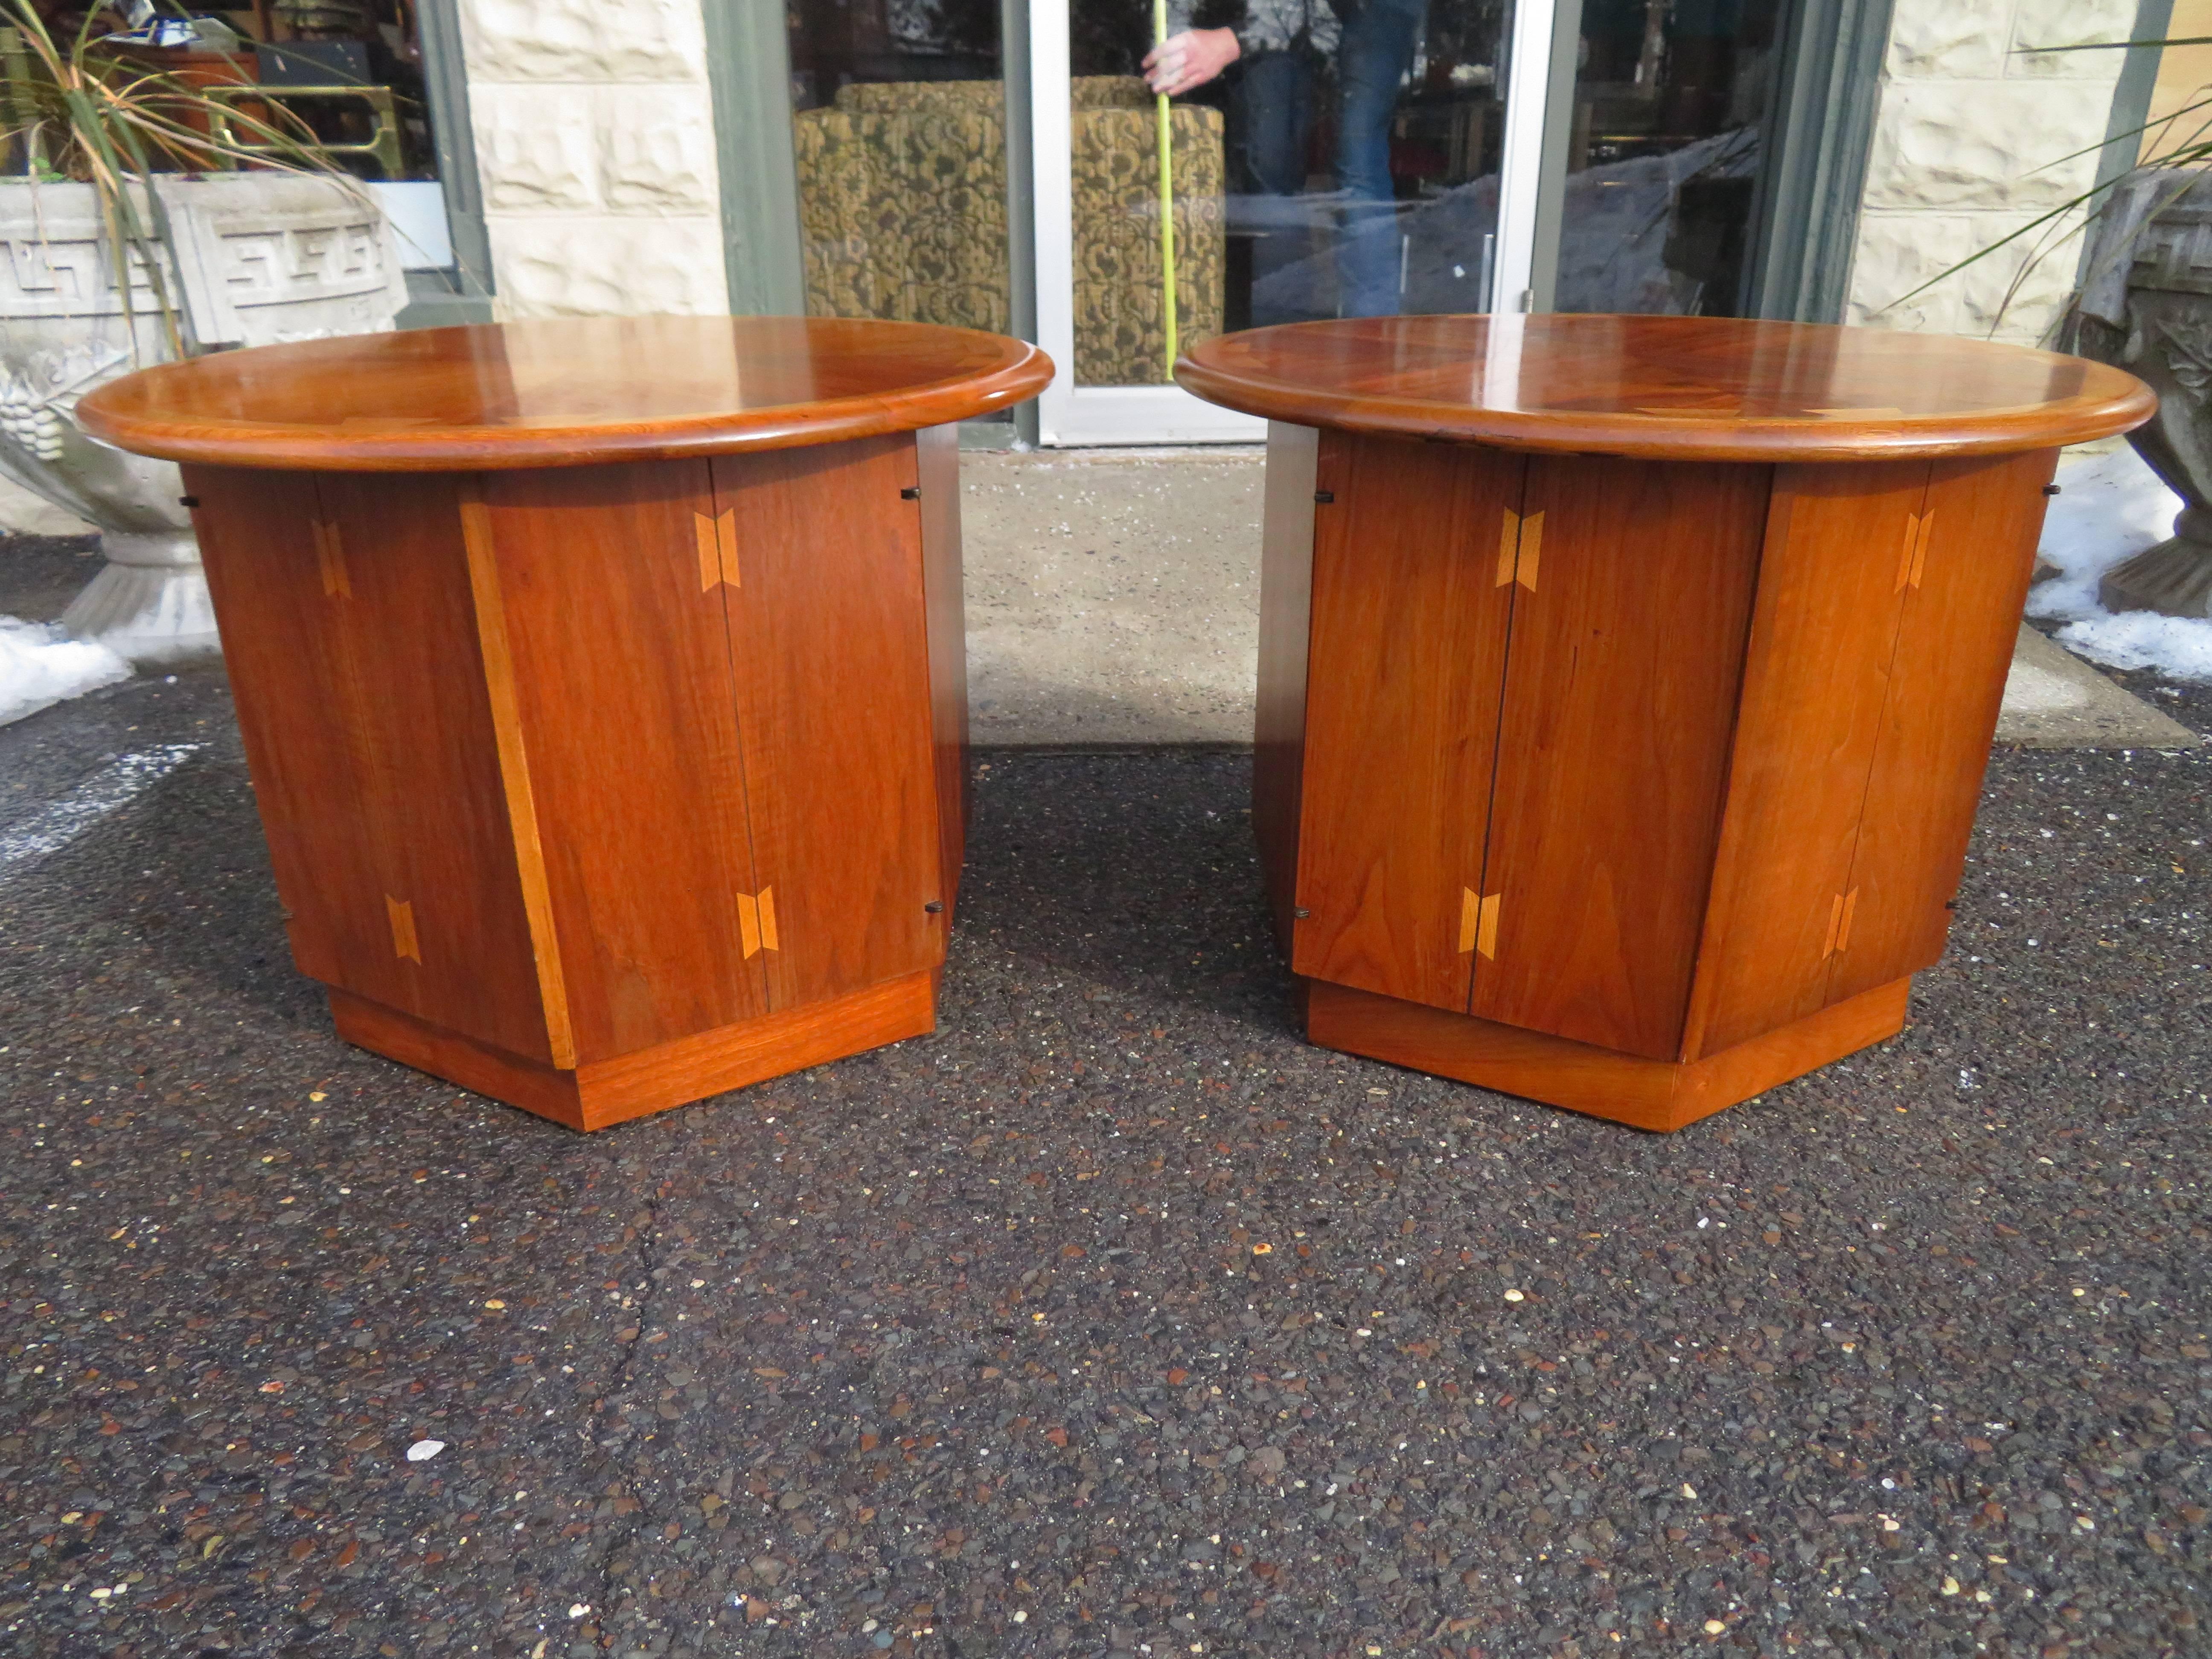 Lovely Pair of Lane Acclaim Drum End Side Table, Mid-Century Modern 1